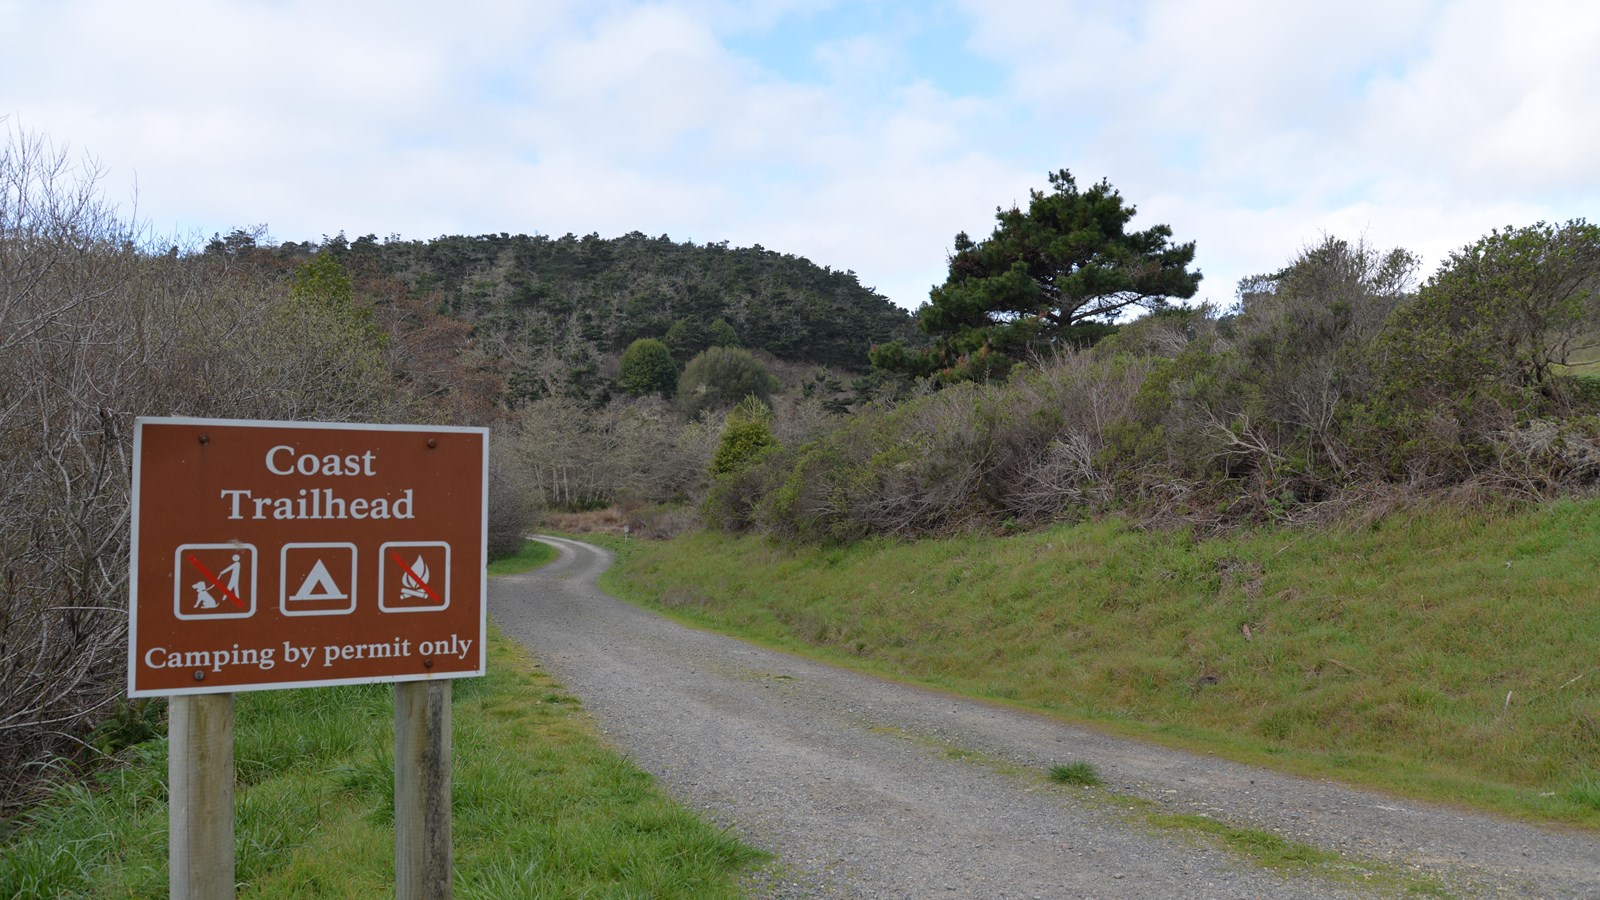 A shrub-lined gravel path winds into the distance behind a brown metal trailhead sign